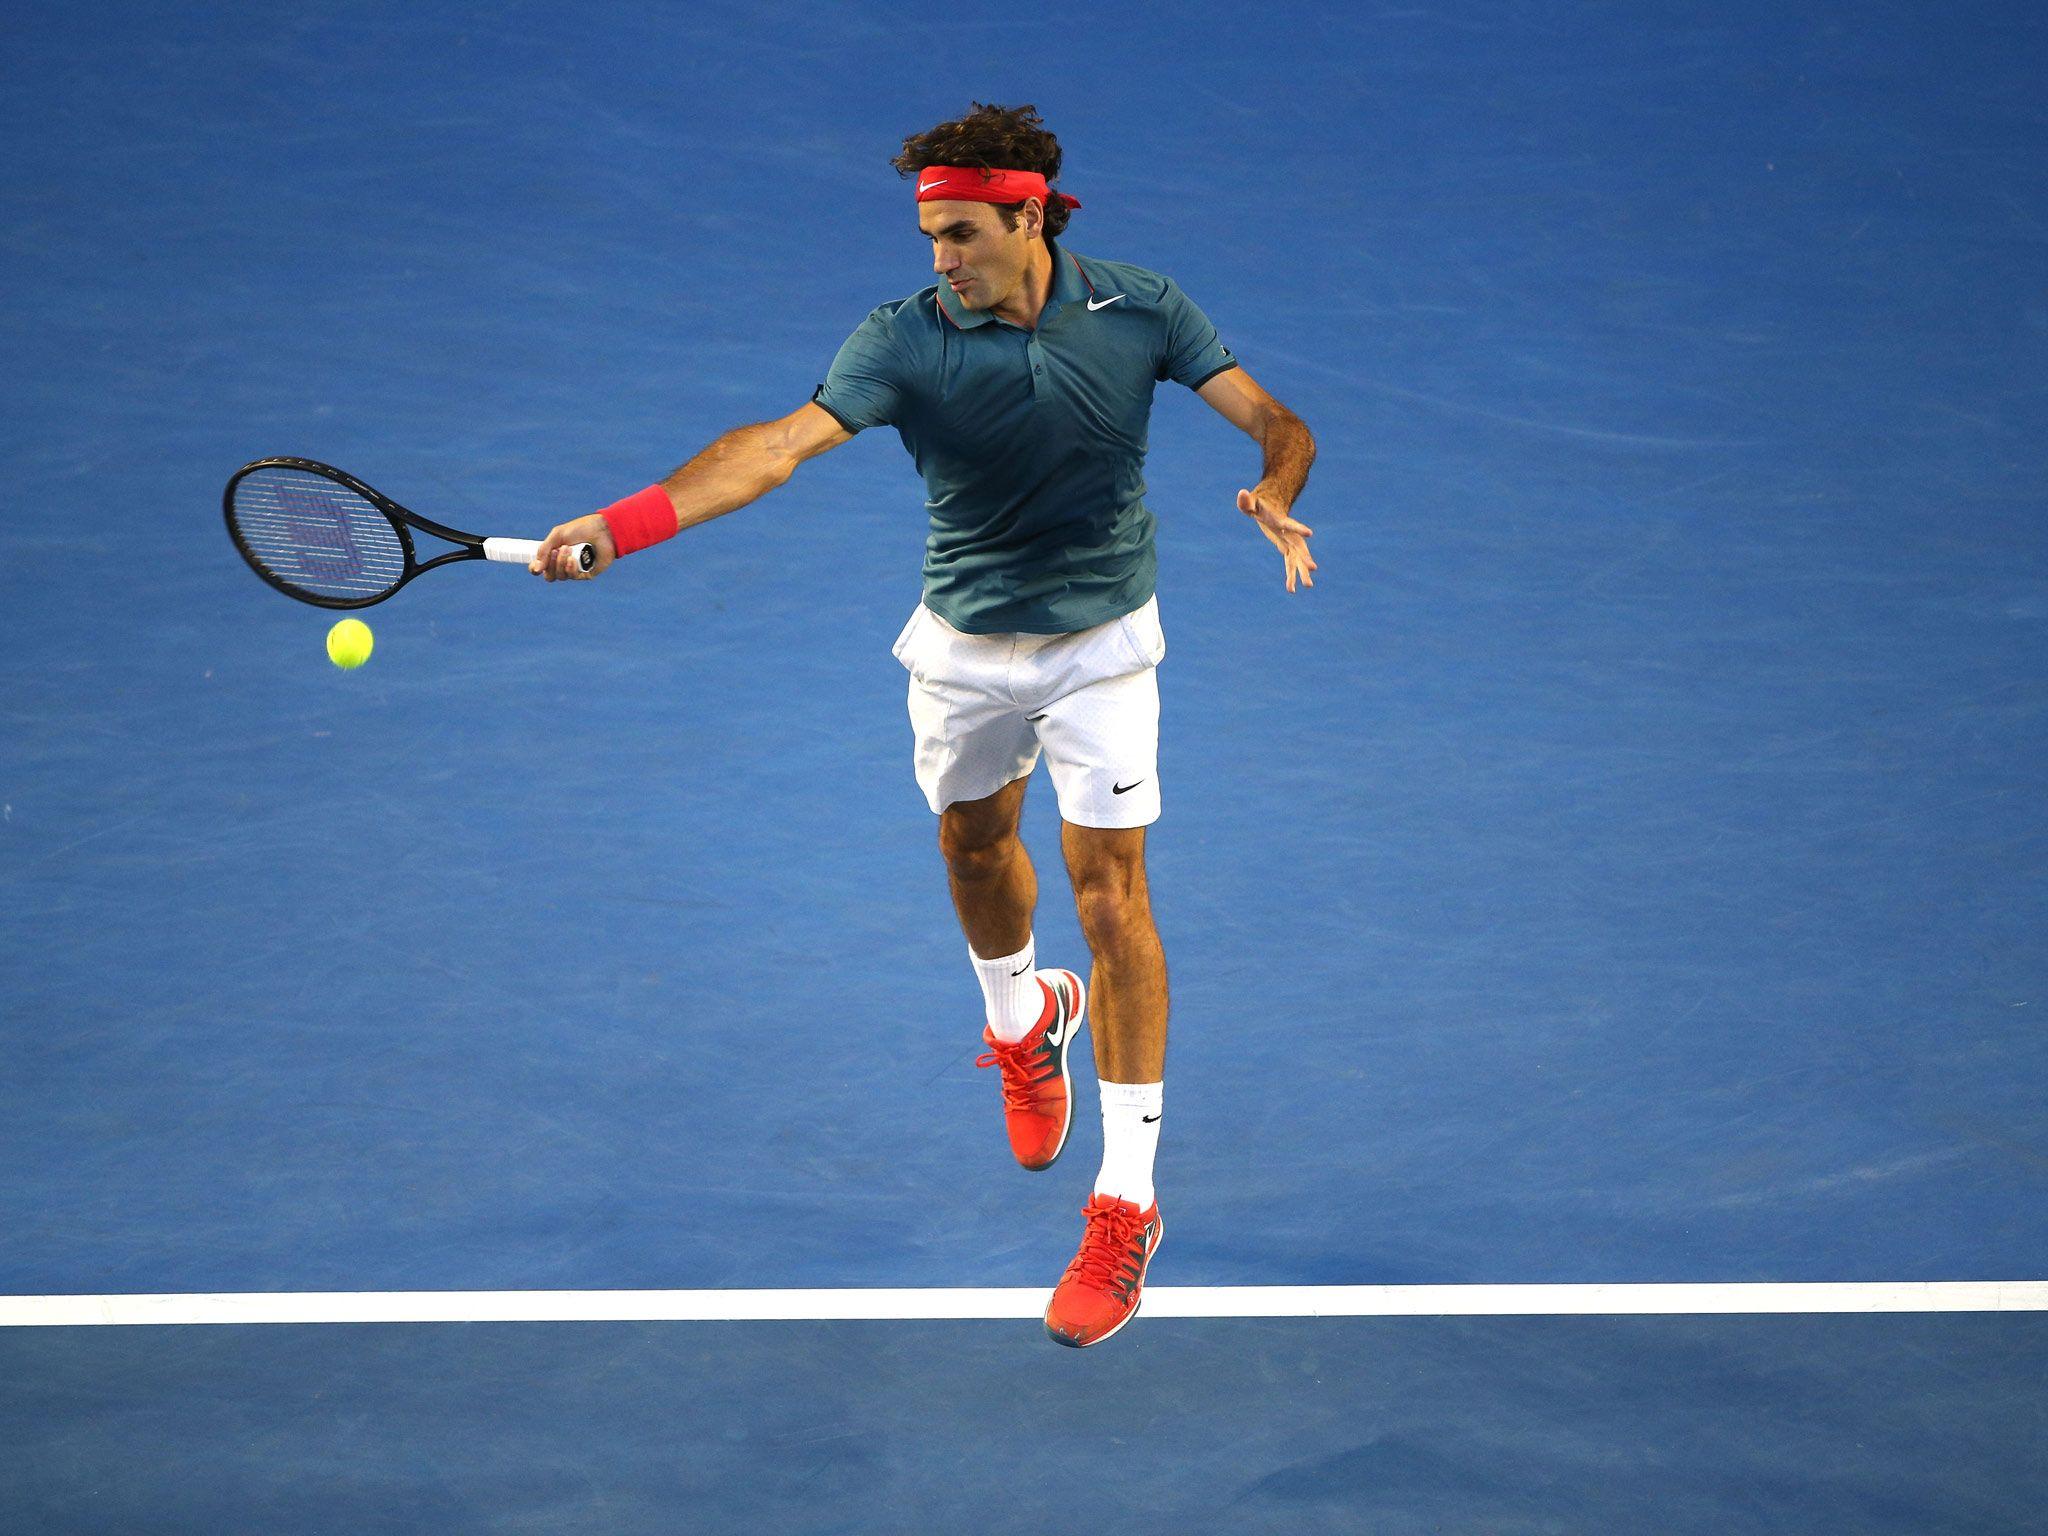 Australian Open 2014: Andy Murray unable to stop Roger Federer who